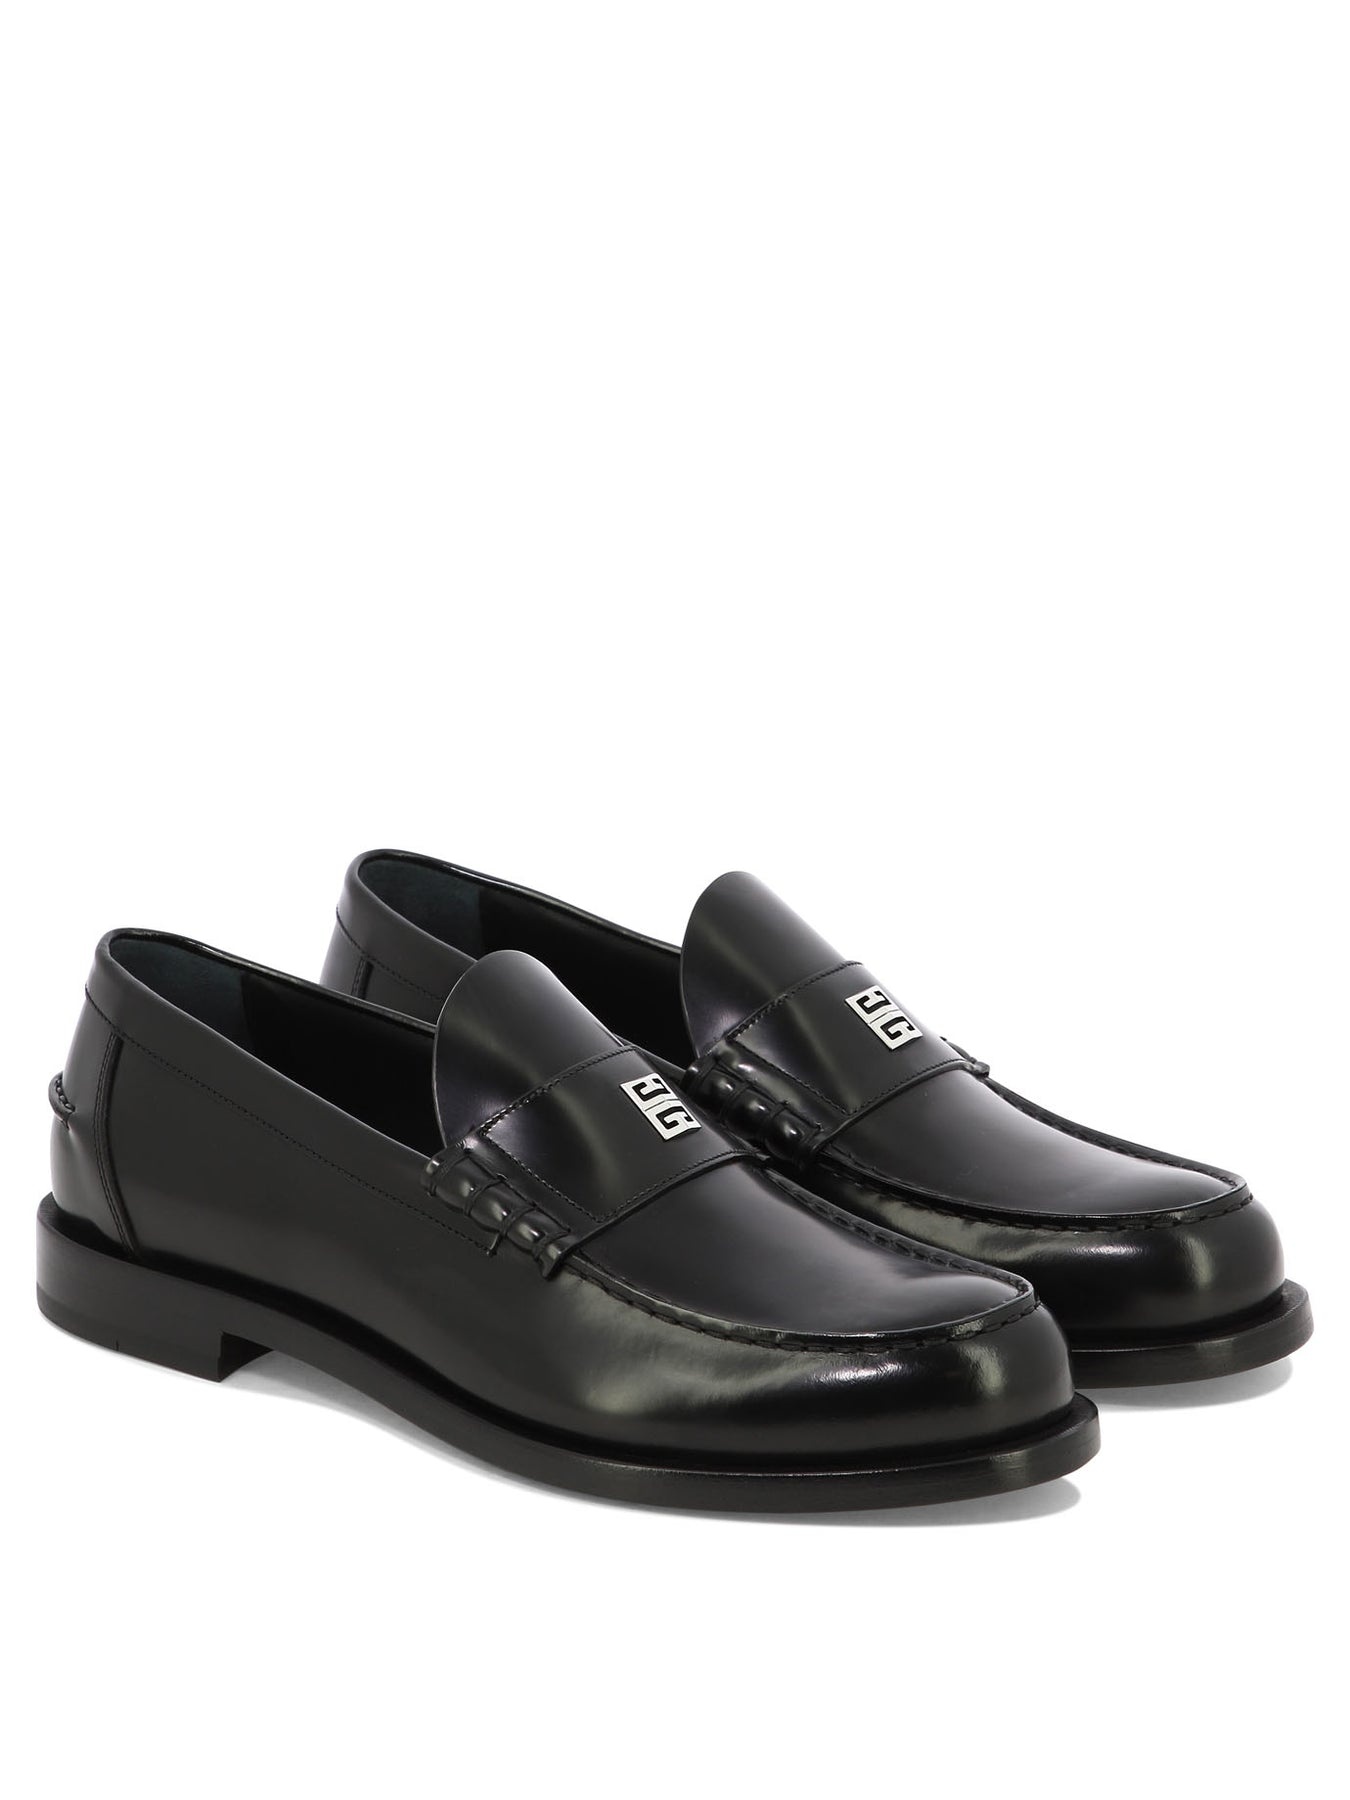 Mr G Loafers & Slippers Black - 2